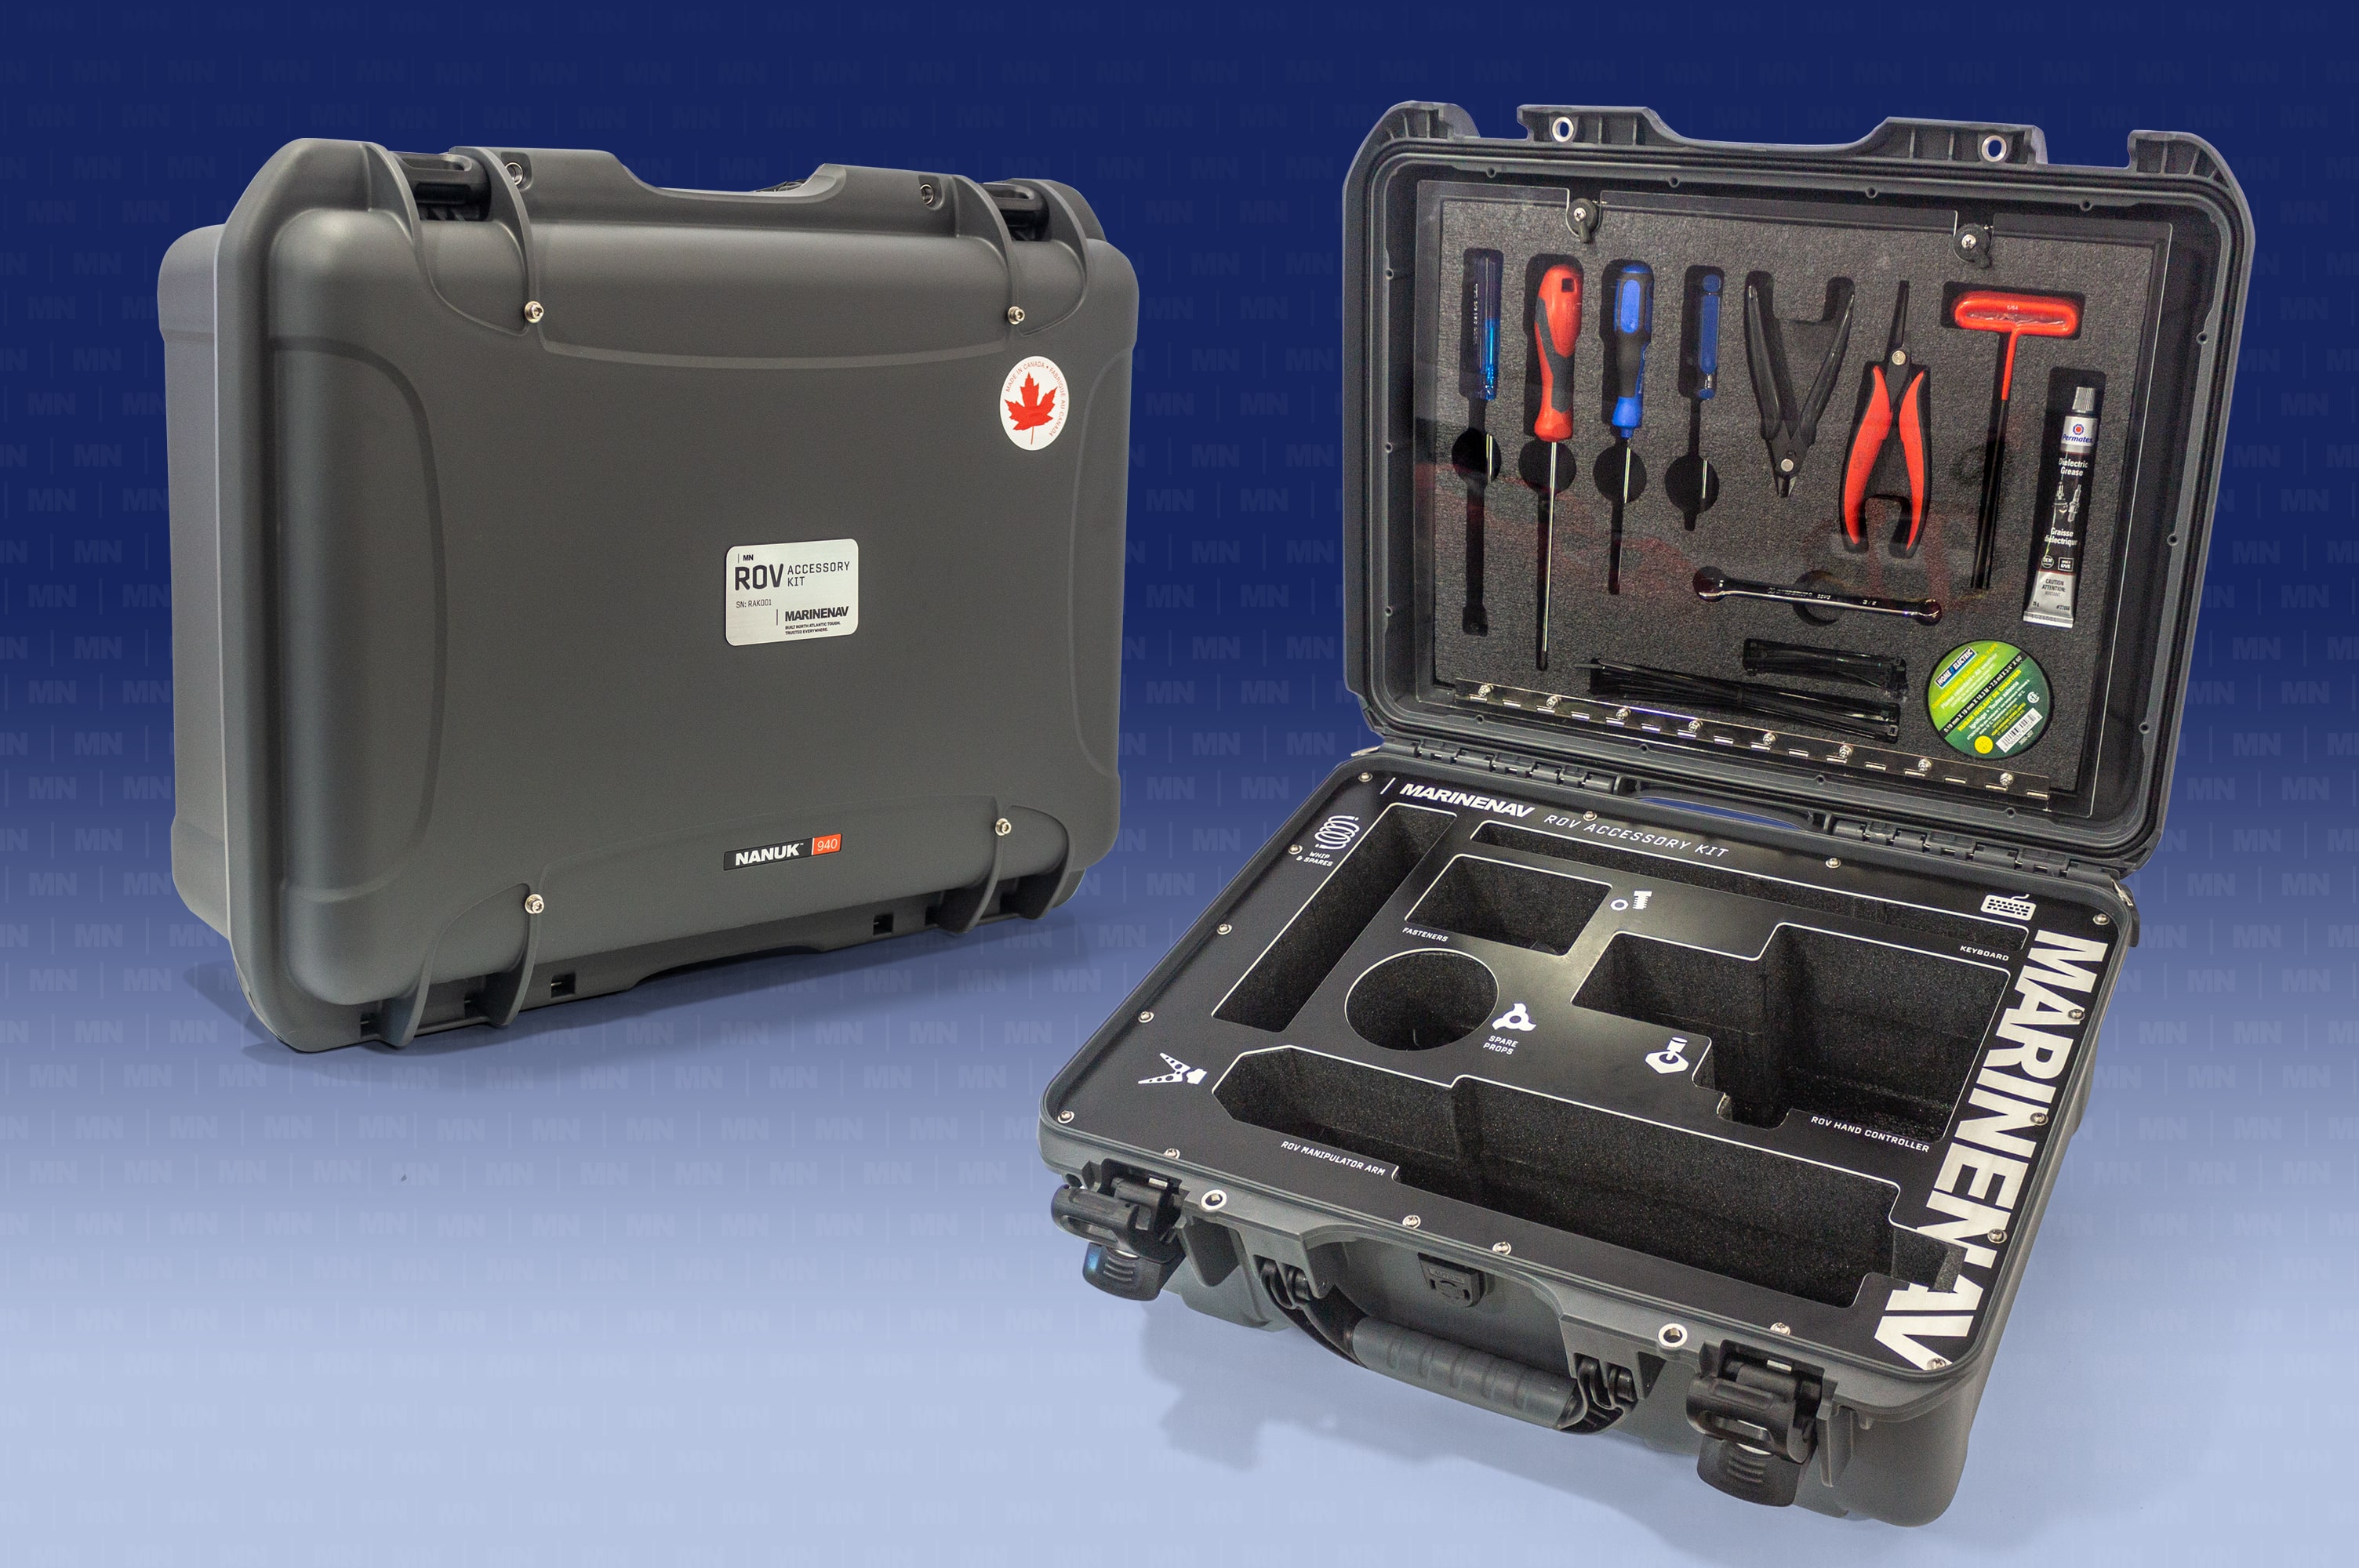 A compact, self-contained water resistant case organizes and protects essential ROV accessories.